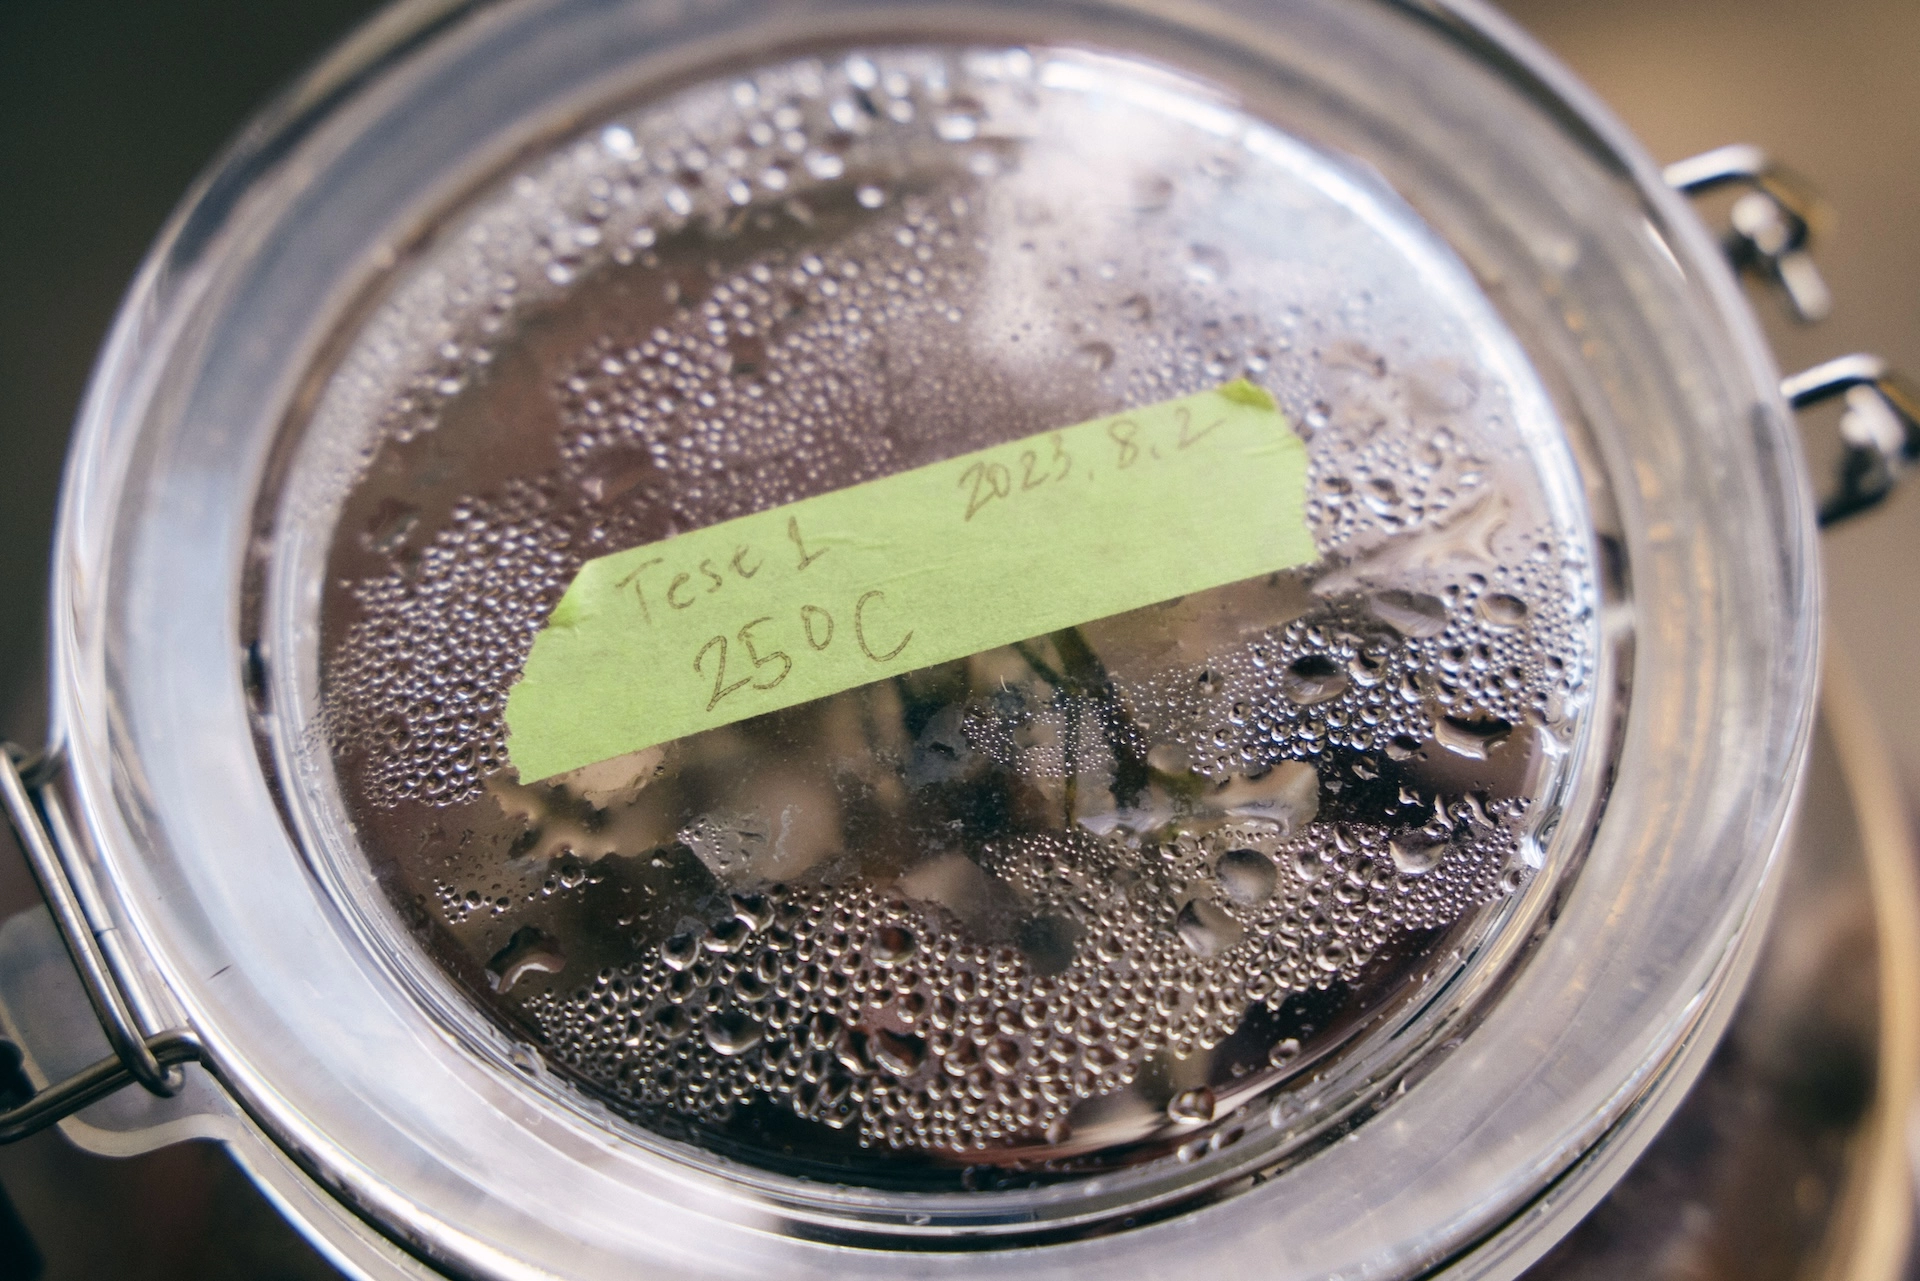 Green tape is affixed to the lid of the glass vessel. The handwritten text reads “Test 1 25°C 2023.8.2.” There are water droplets on the back of the lid.